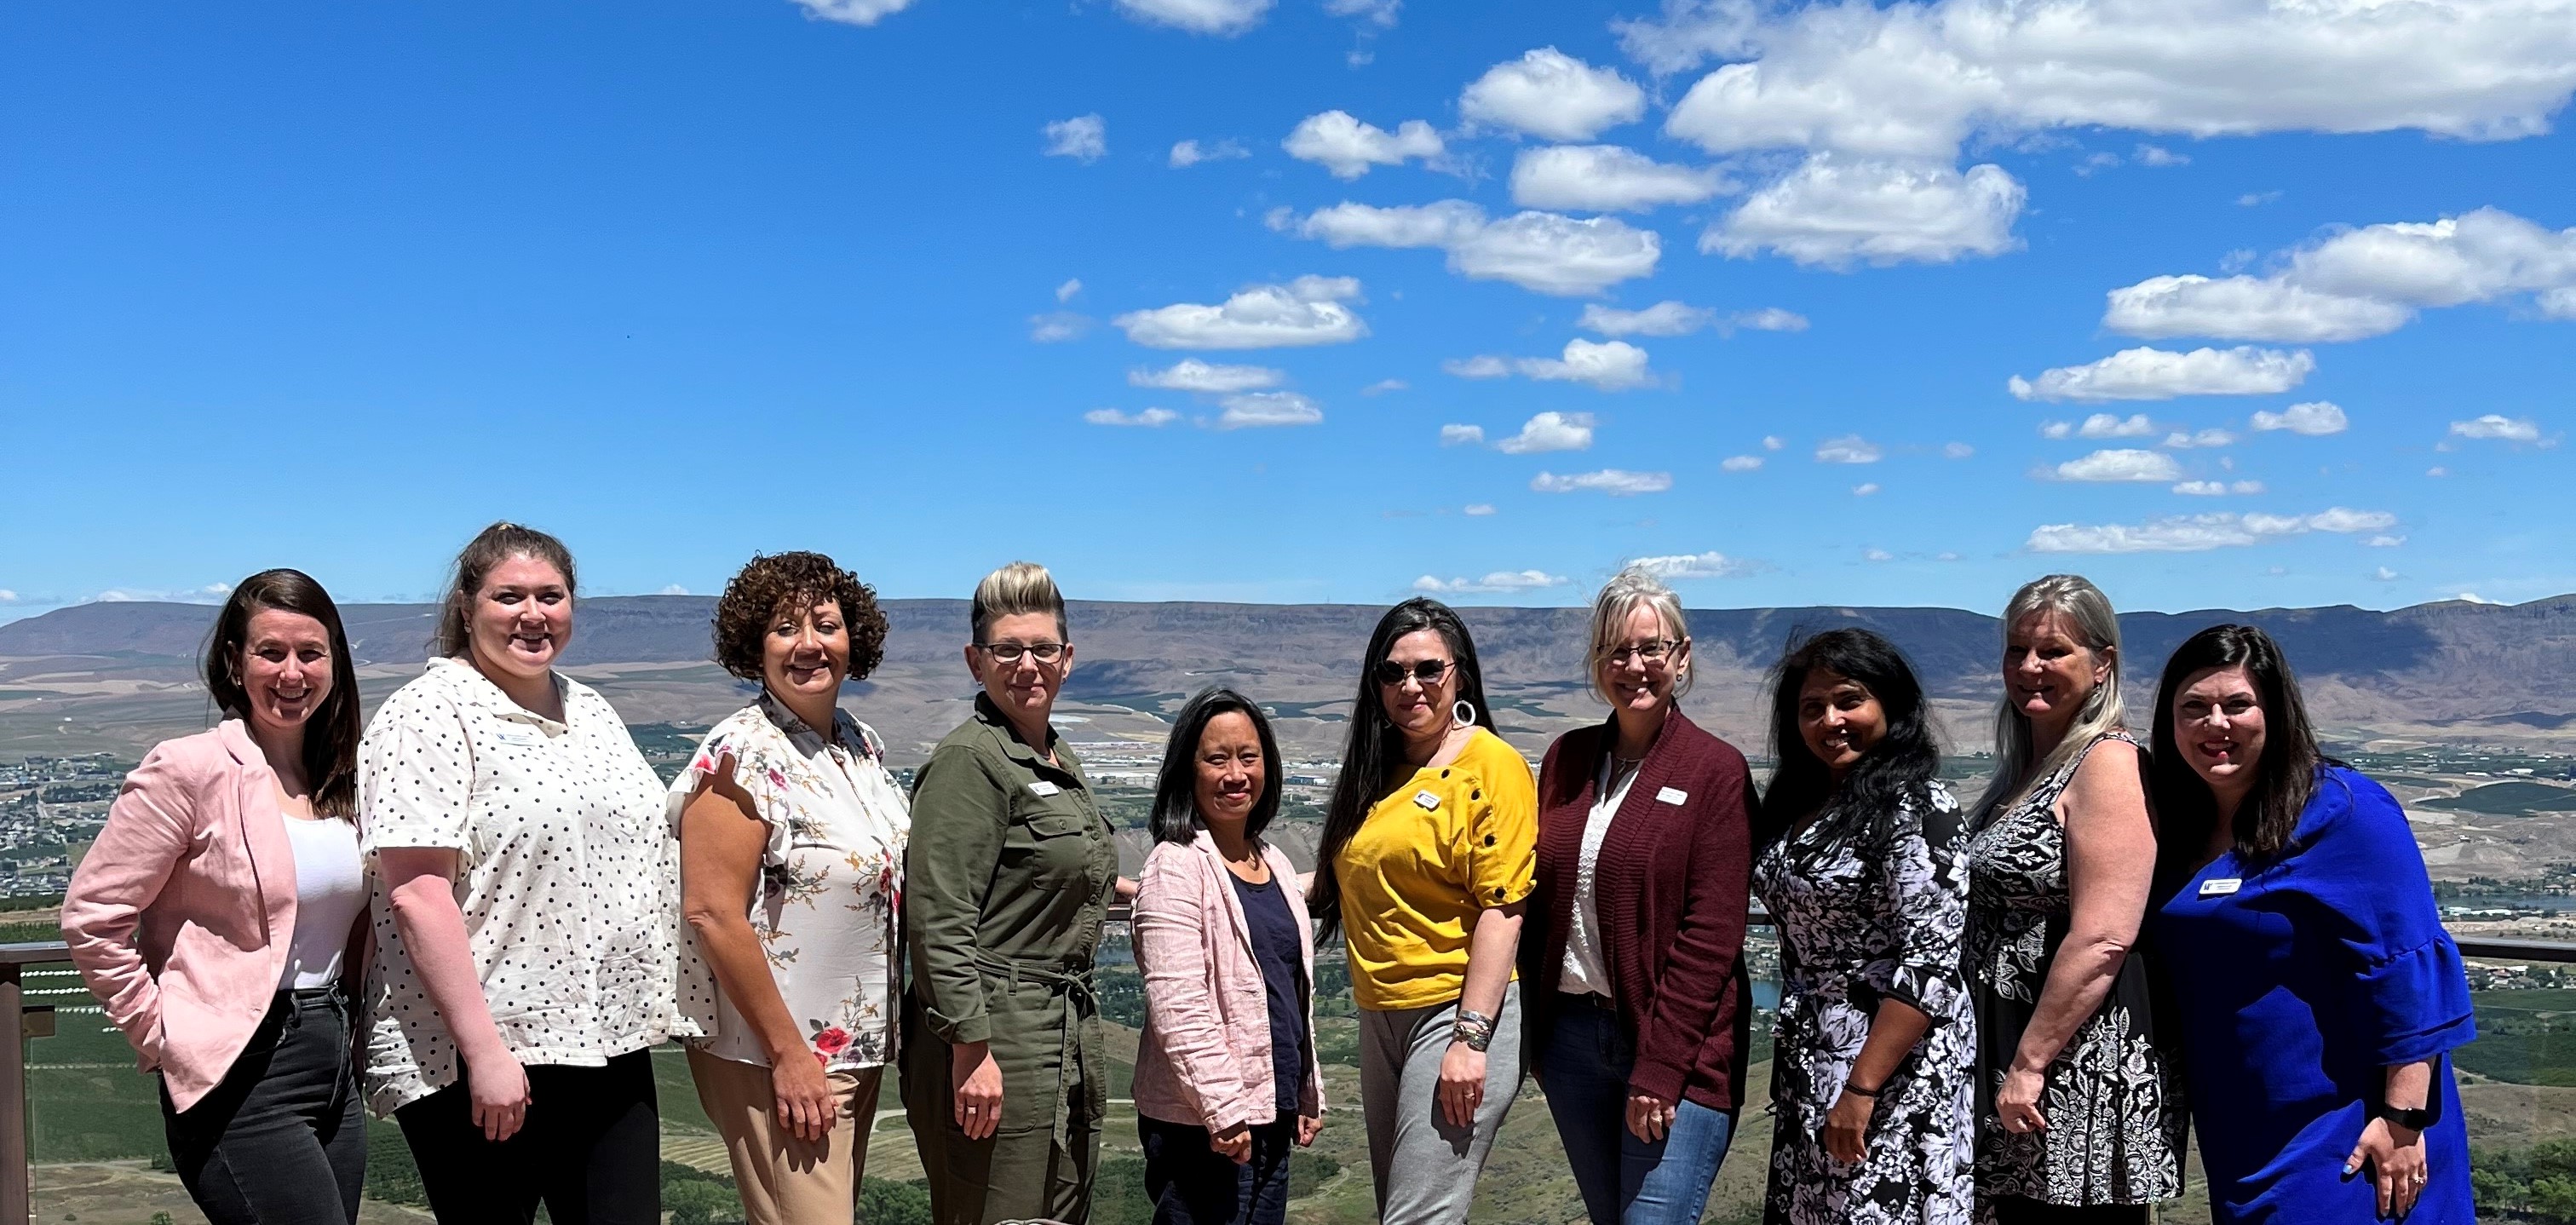 WSWC Commissioners with a view of the Wenatchee valley